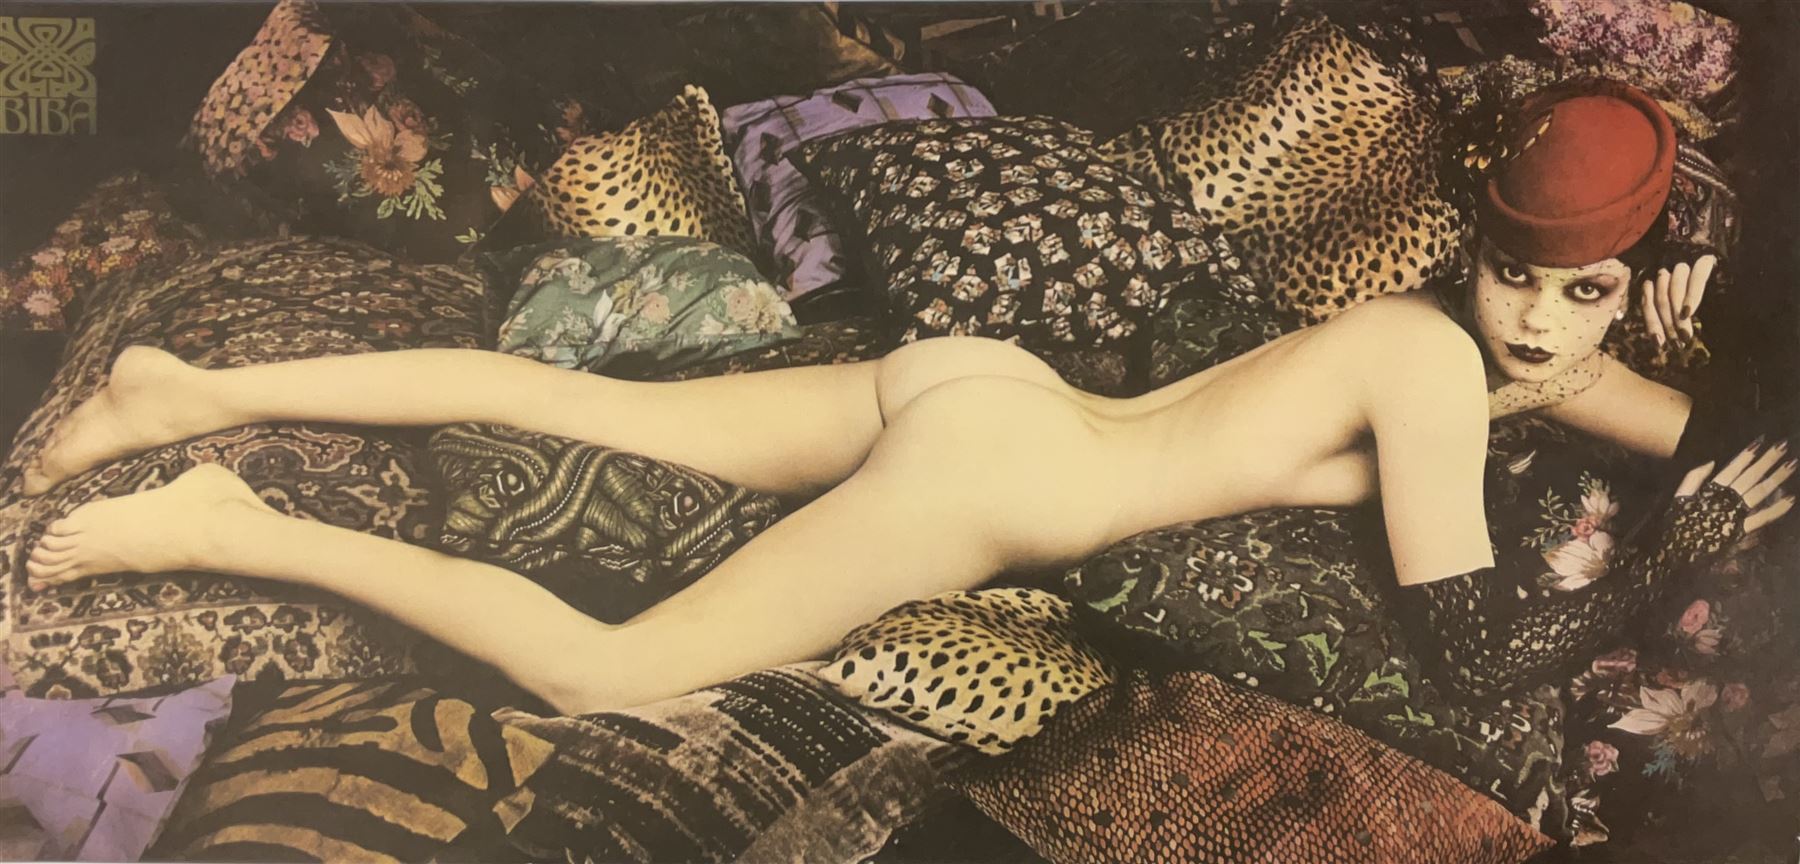 A 1974 Biba poster photographed by James Wedge for Biba Stores